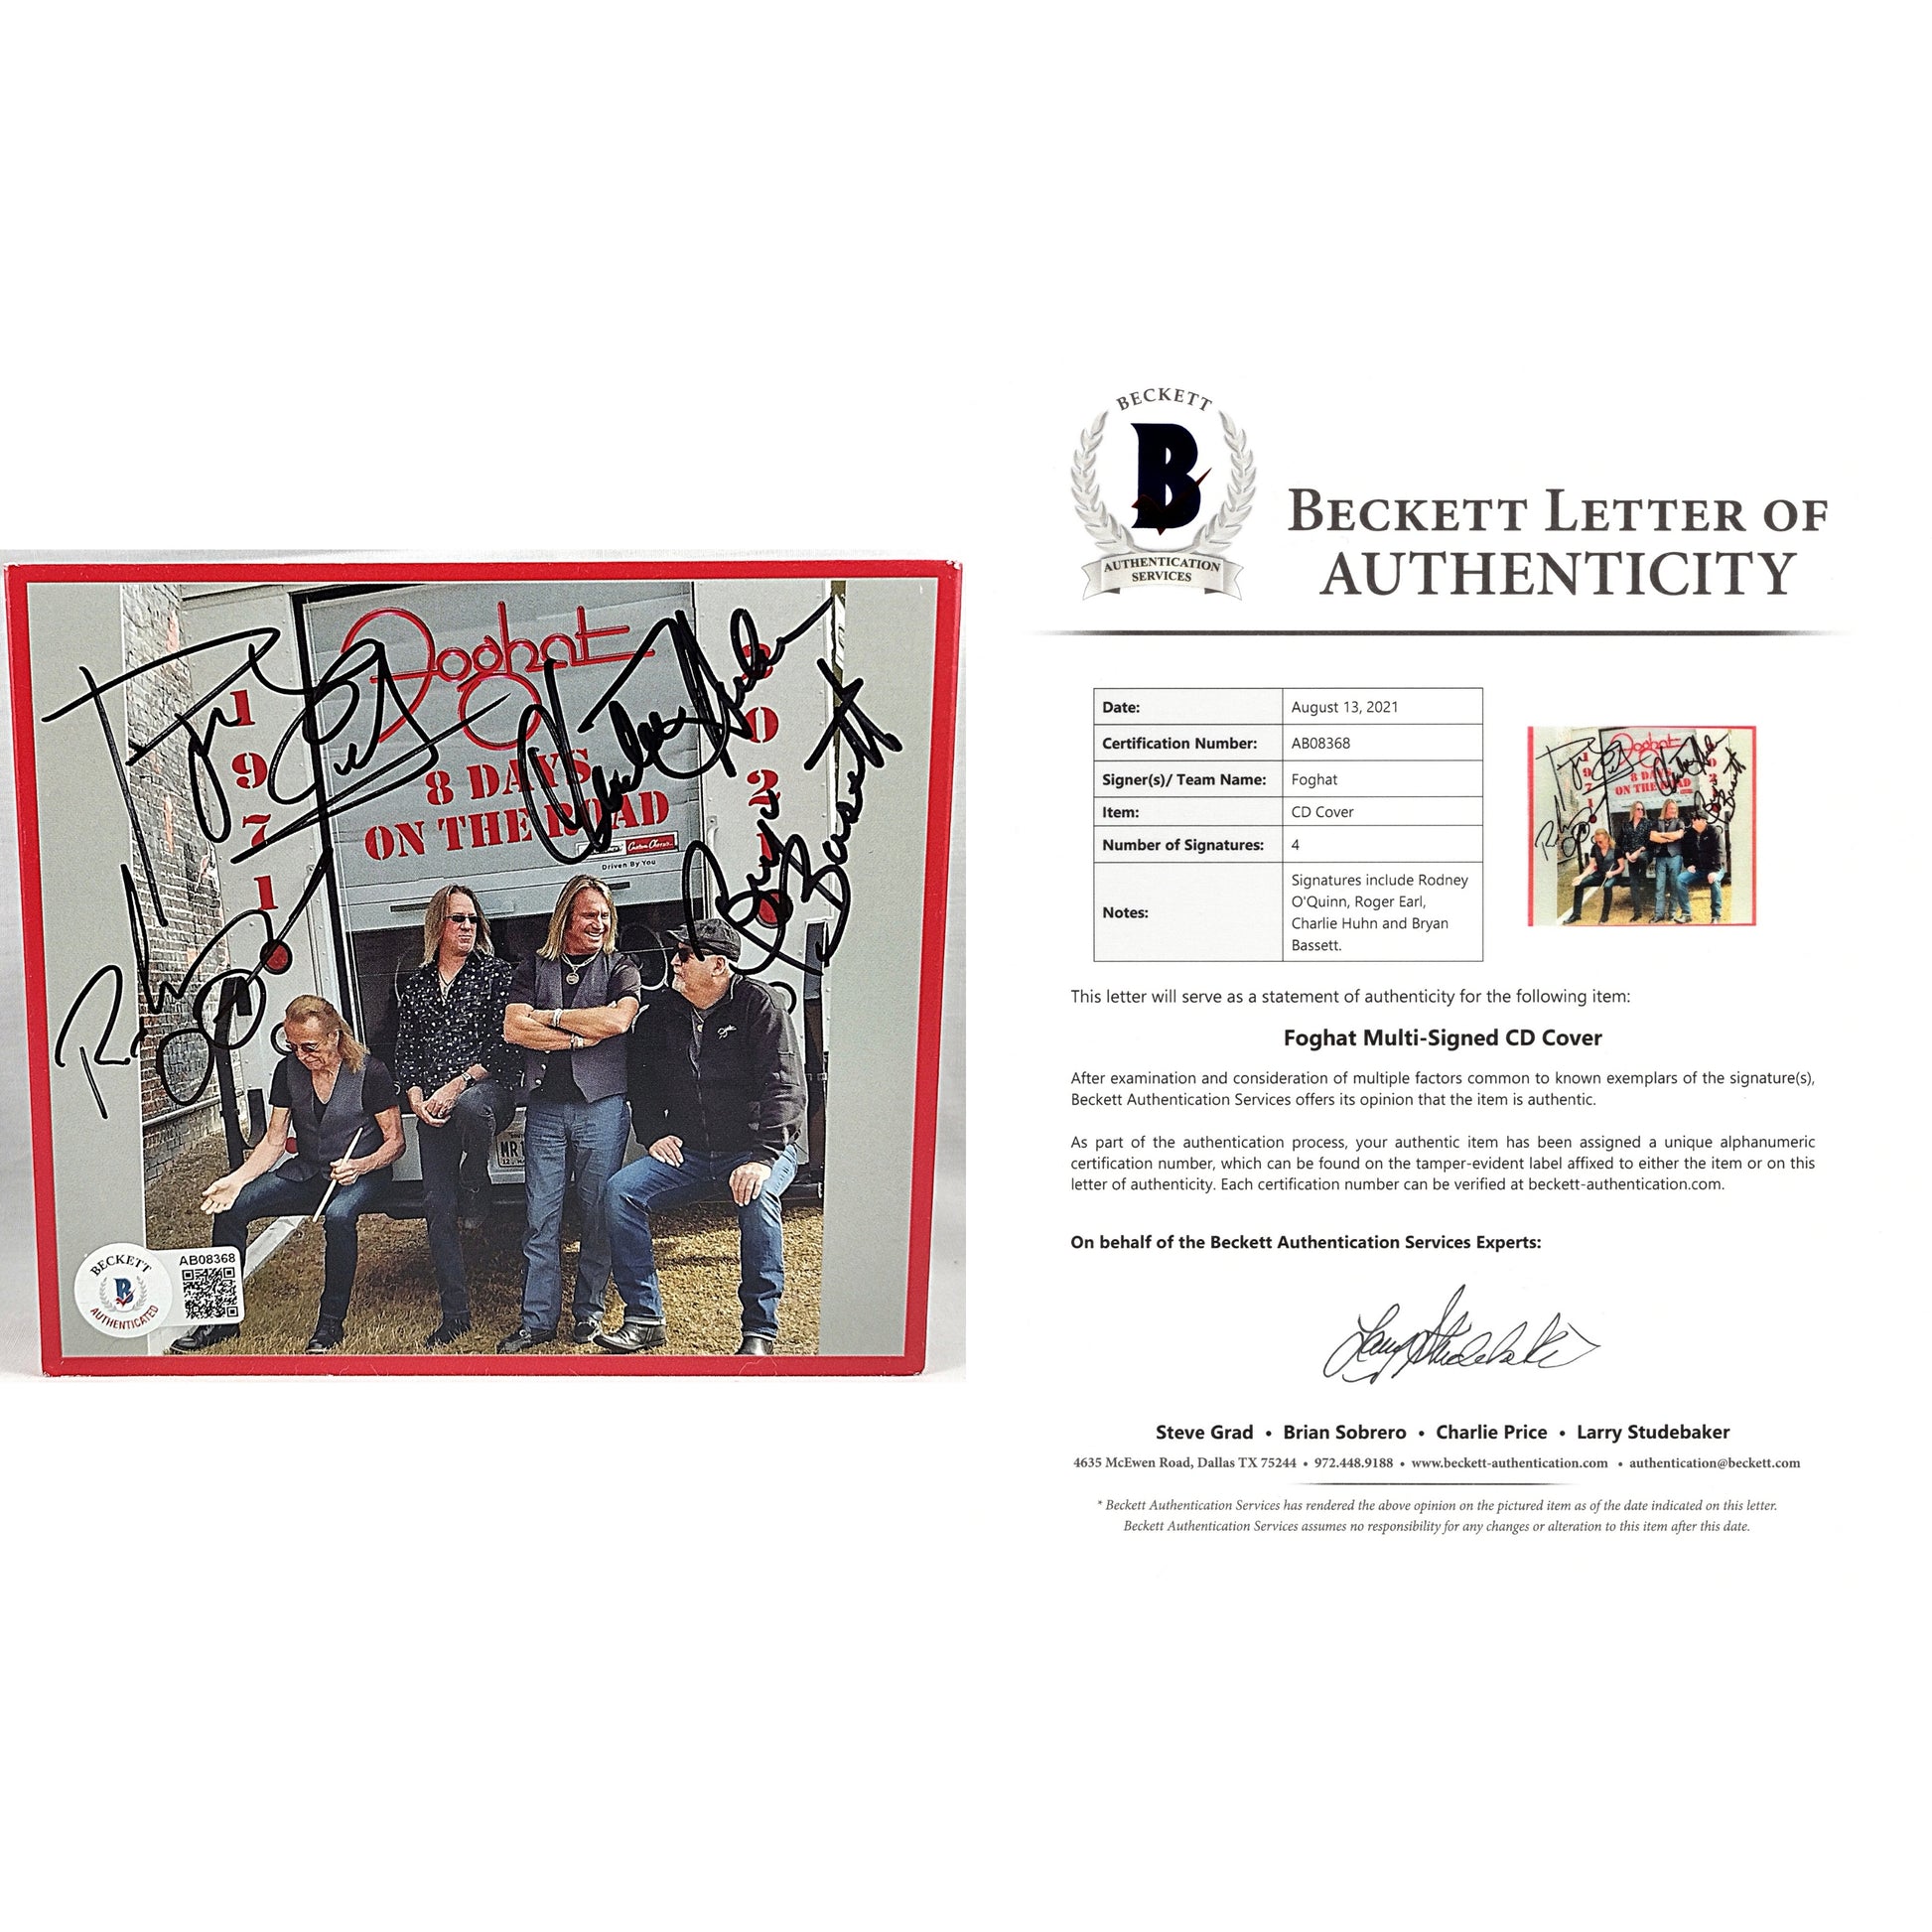 Music- Autographed- Foghat Signed 8 Days On The Road Compact Disc CD Cover Beckett Authentication 101